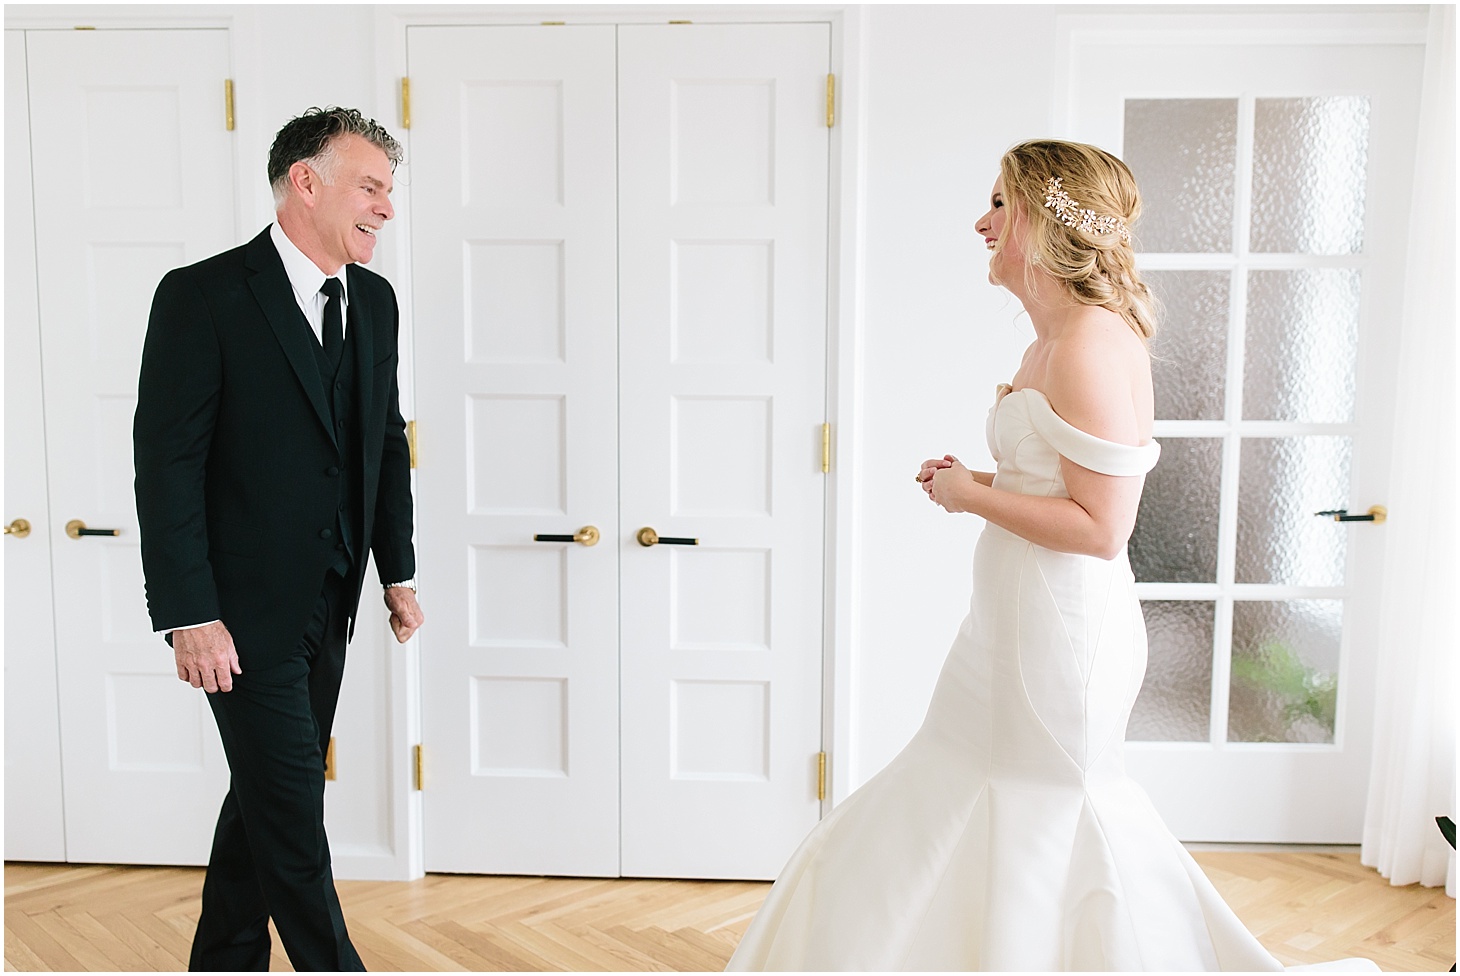 Bride's First Look with Father at The LINE Hotel DC, Anne Barge Wedding Gown, Modern Spring Wedding at The LINE Hotel DC, Wedding Ceremony at National United Methodist Church, Sarah Bradshaw Photography, DC Wedding Photographer